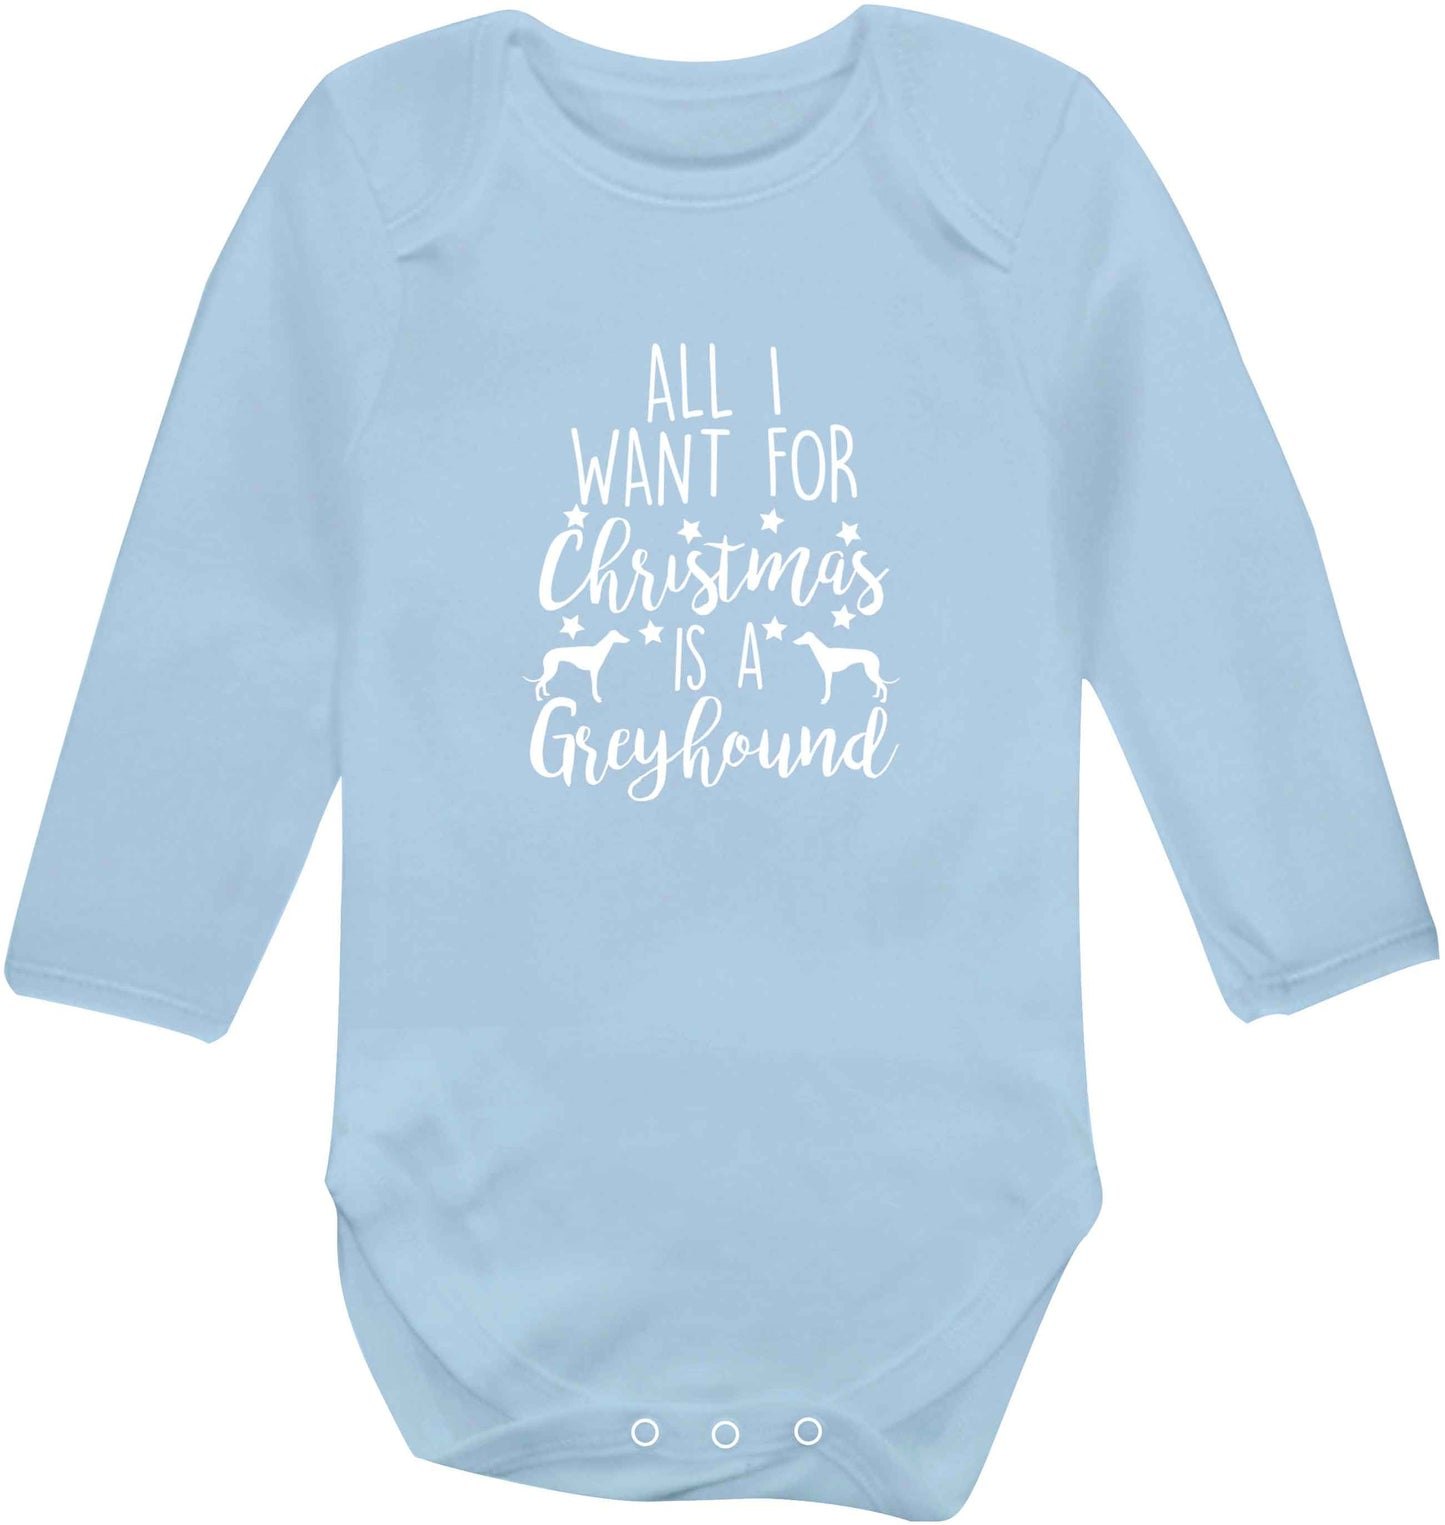 All I want for Christmas is a greyhound baby vest long sleeved pale blue 6-12 months